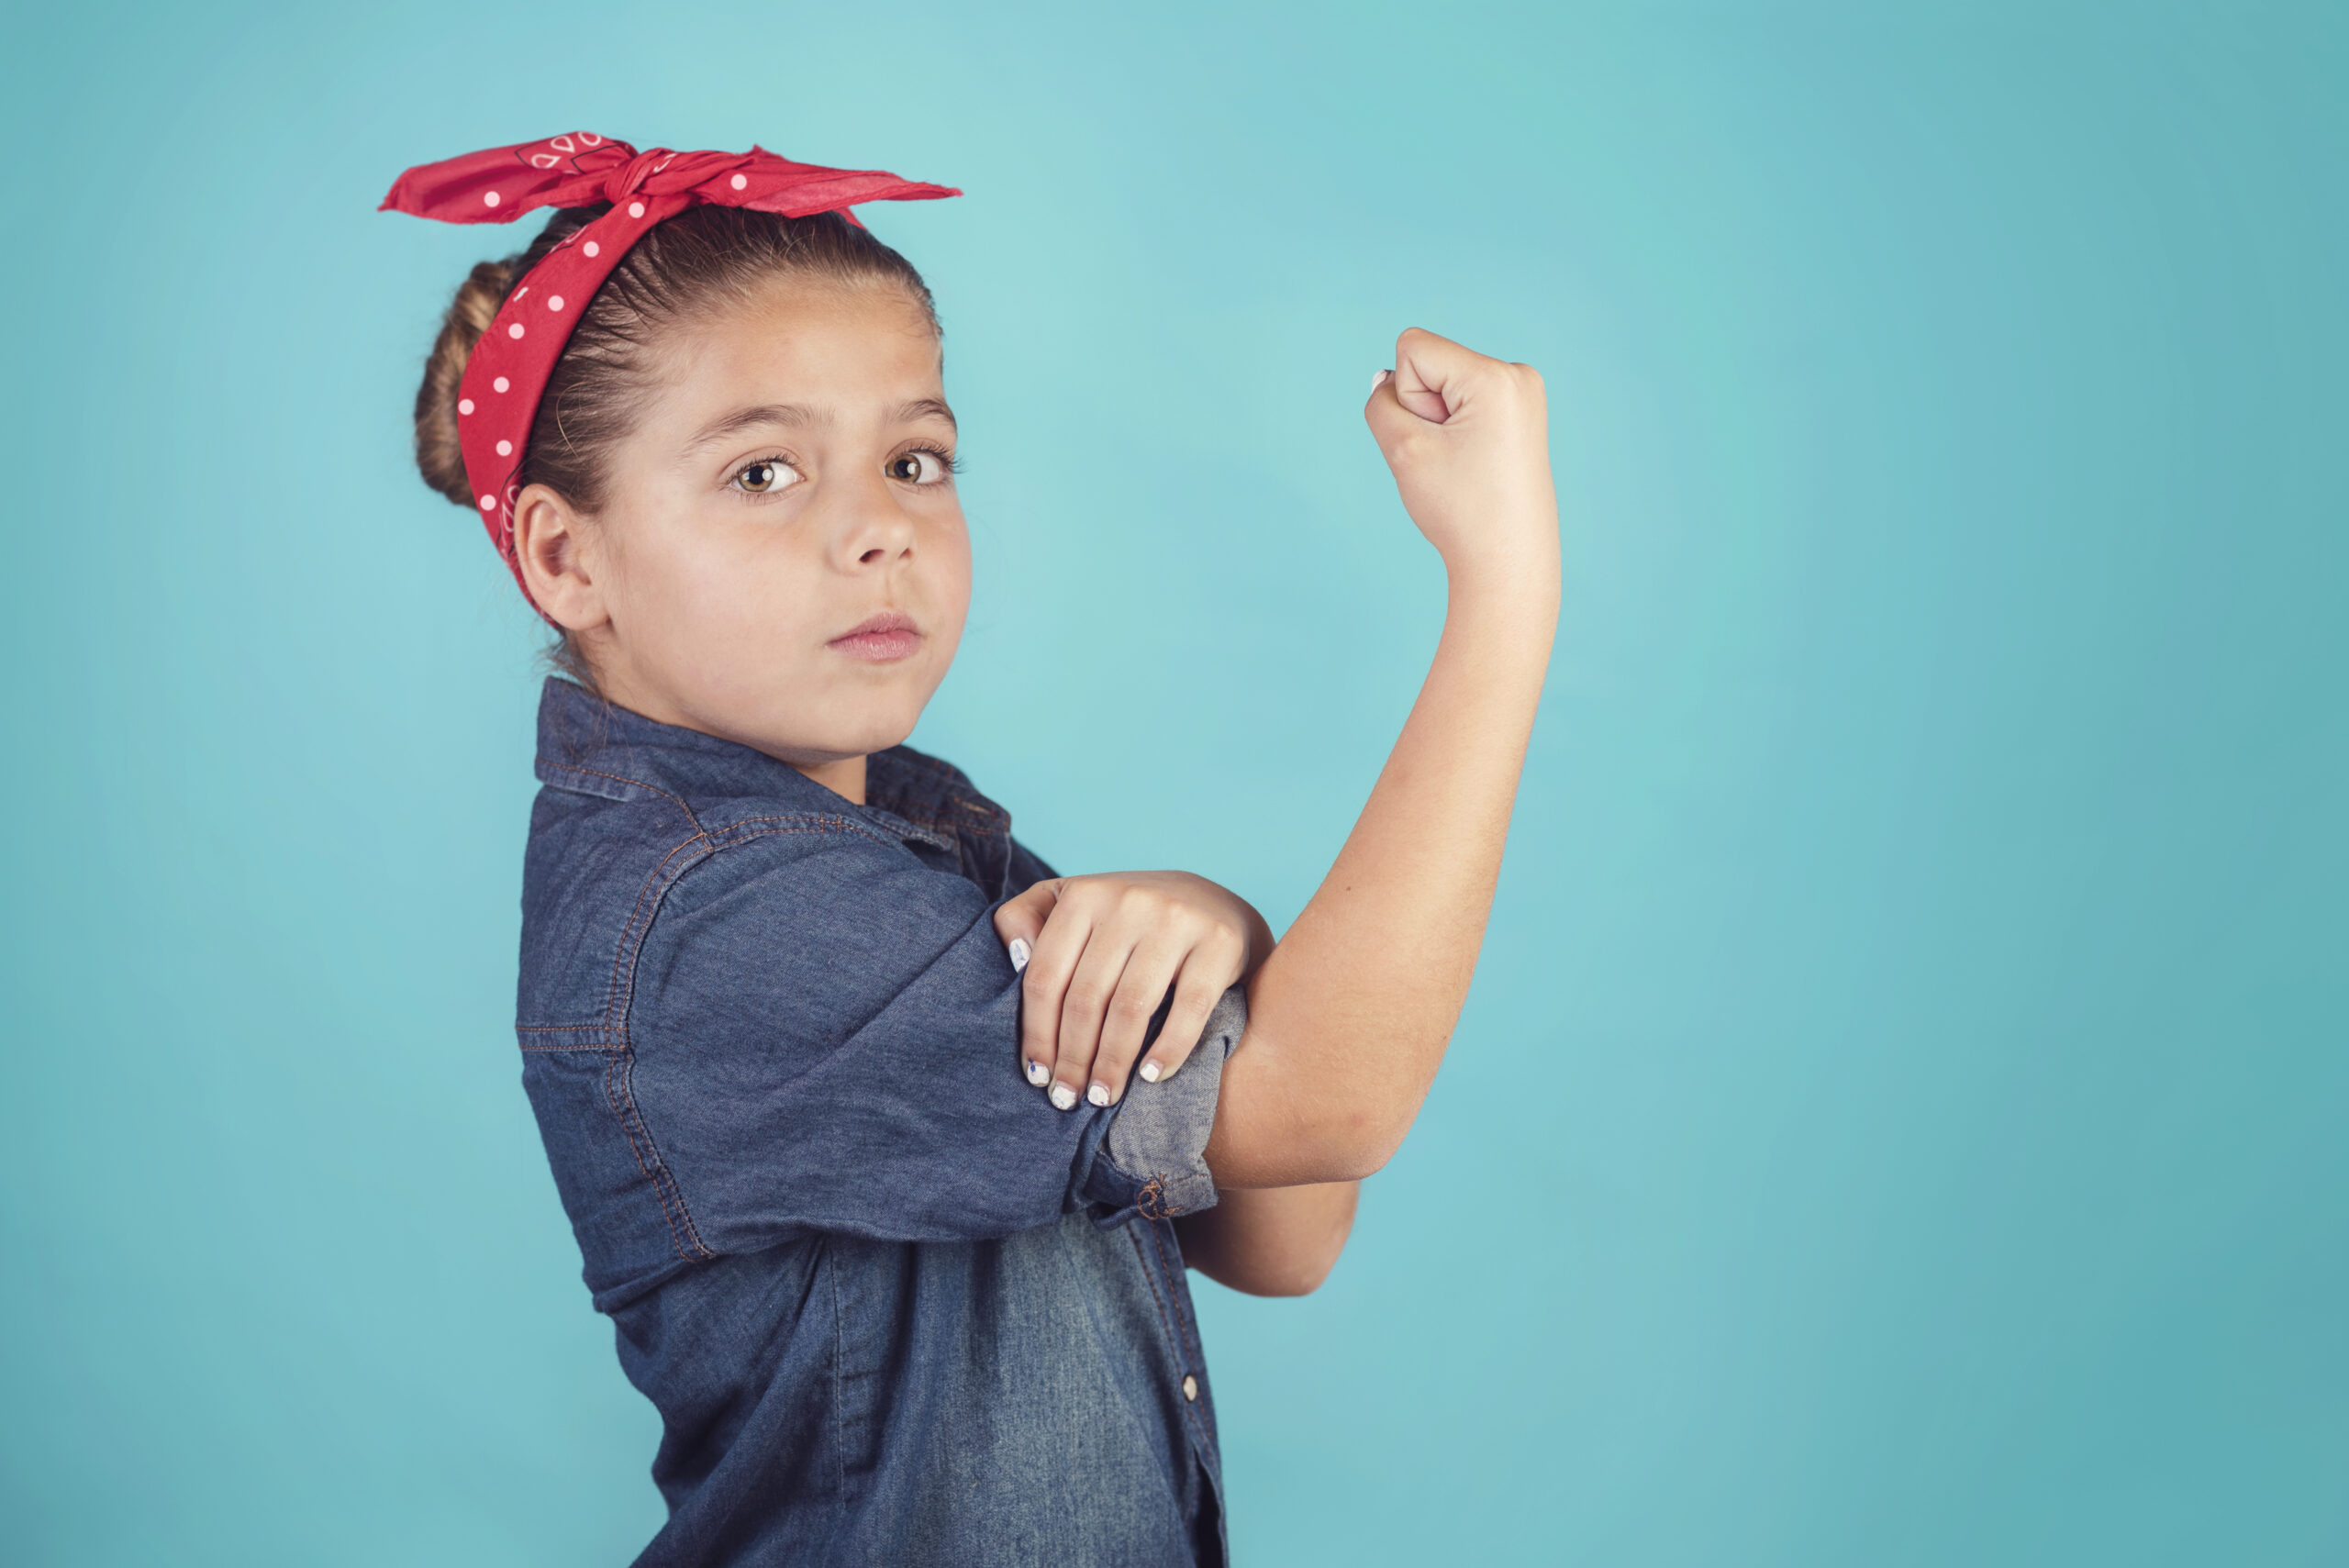 Child dressed as Rosie the Riveter on blue background